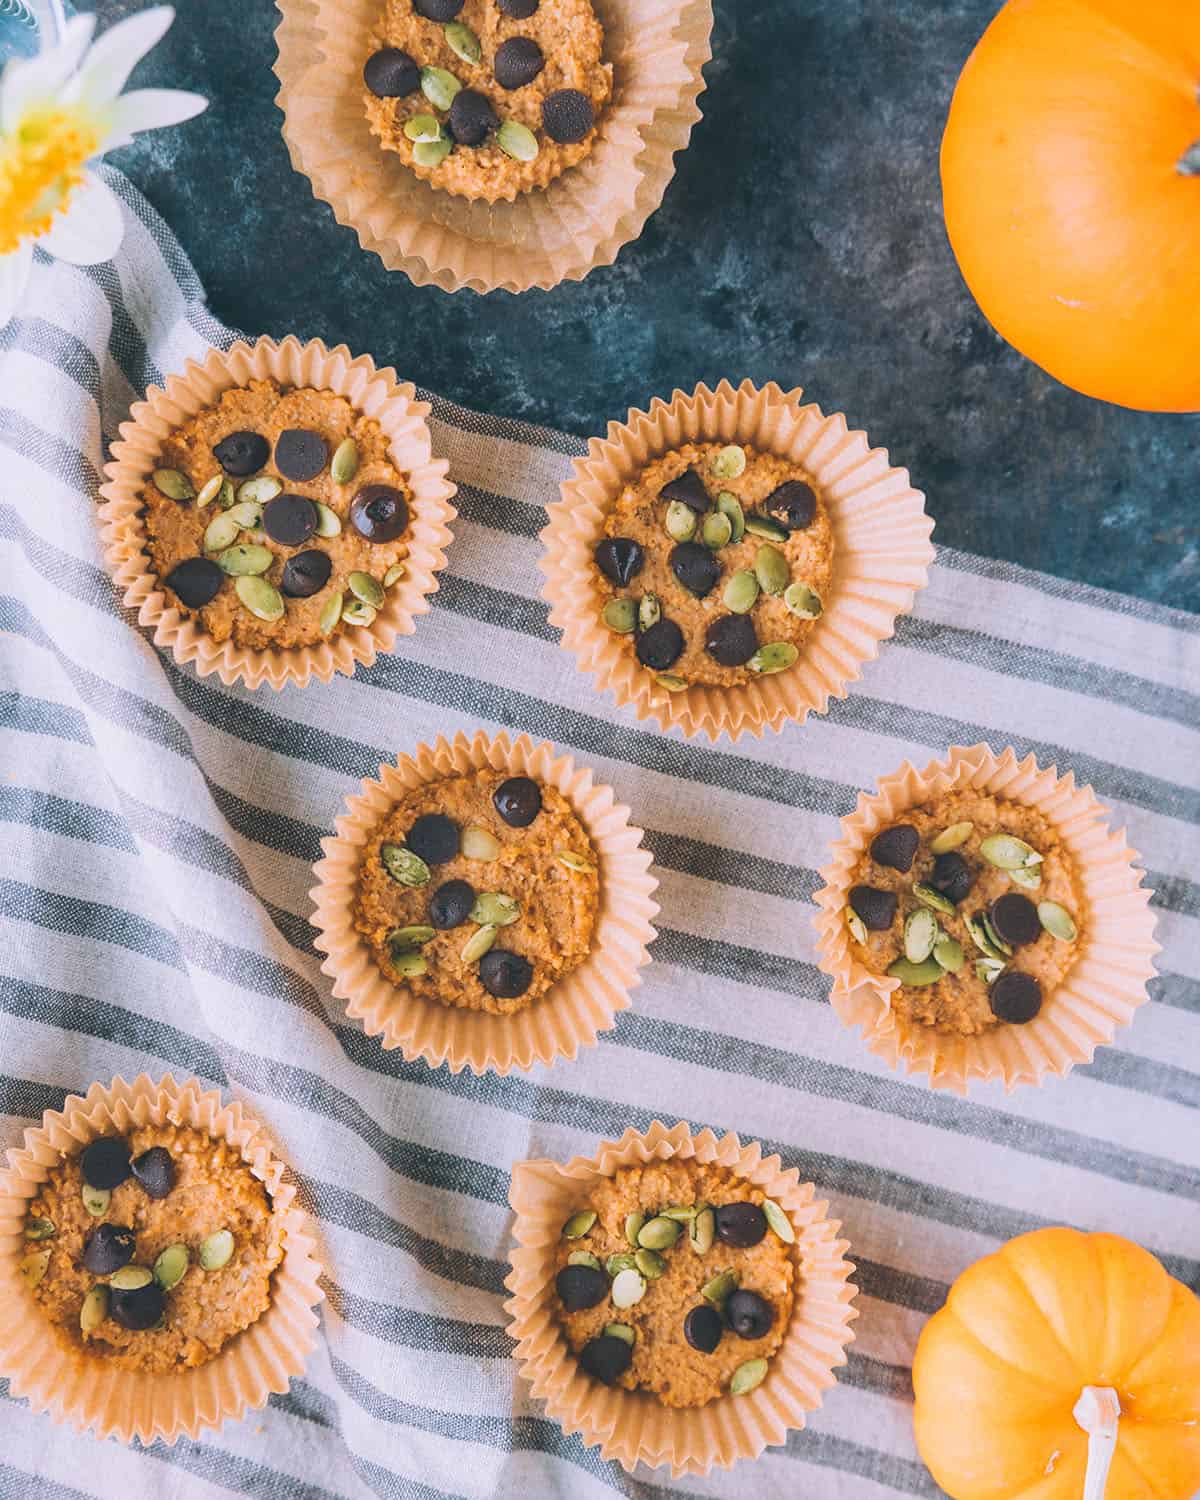 Finished pumpkin cups in papers topped with chocolate chips and pumpkin seeds, on a striped towel surrounded by fresh pumpkins and a white daisy. 